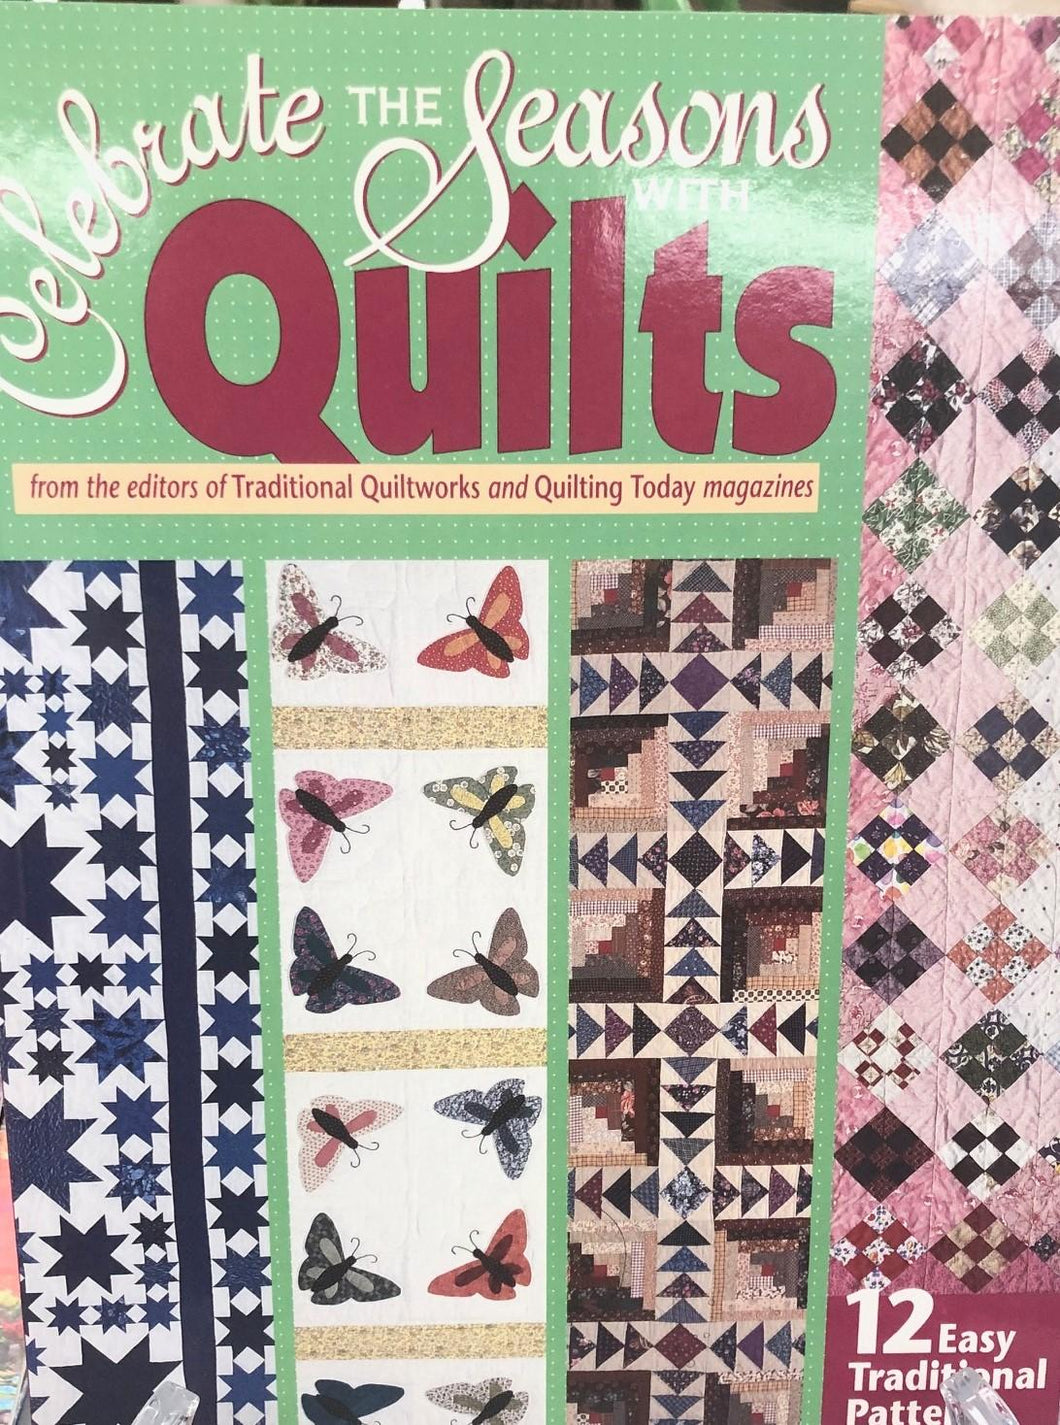 Celebrate the Seasons with Quilts